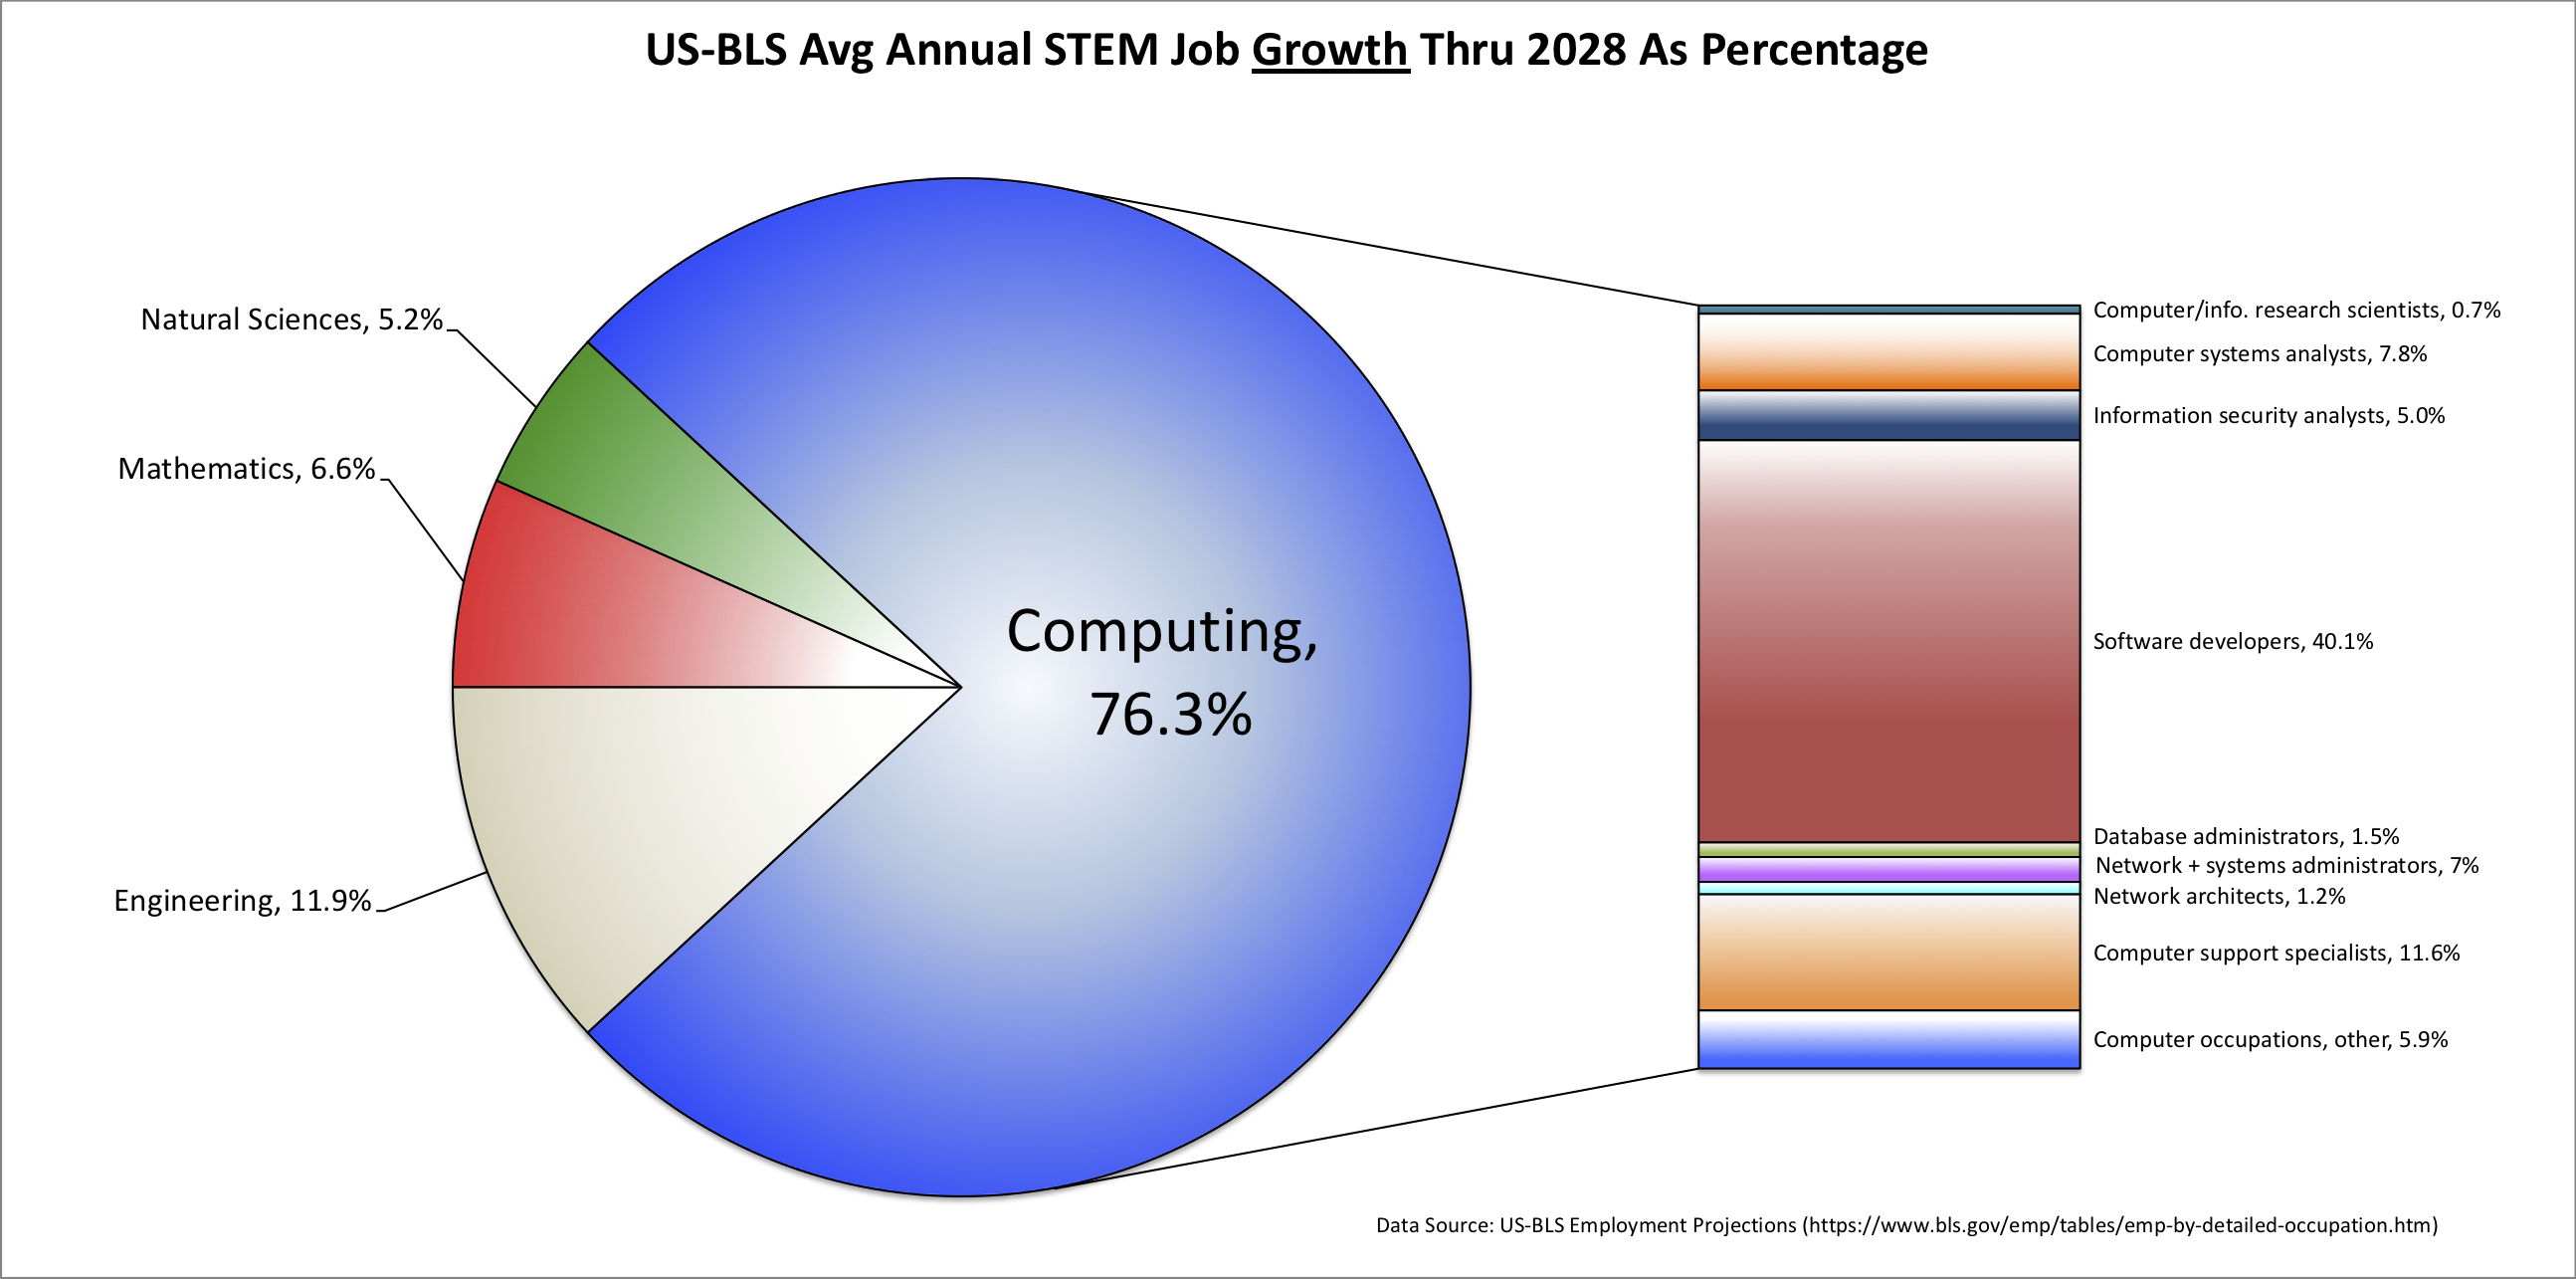 The U.S. Bureau of Labor predicts that between now and 2028,
            almost 69% of the new STEM jobs will be computing jobs